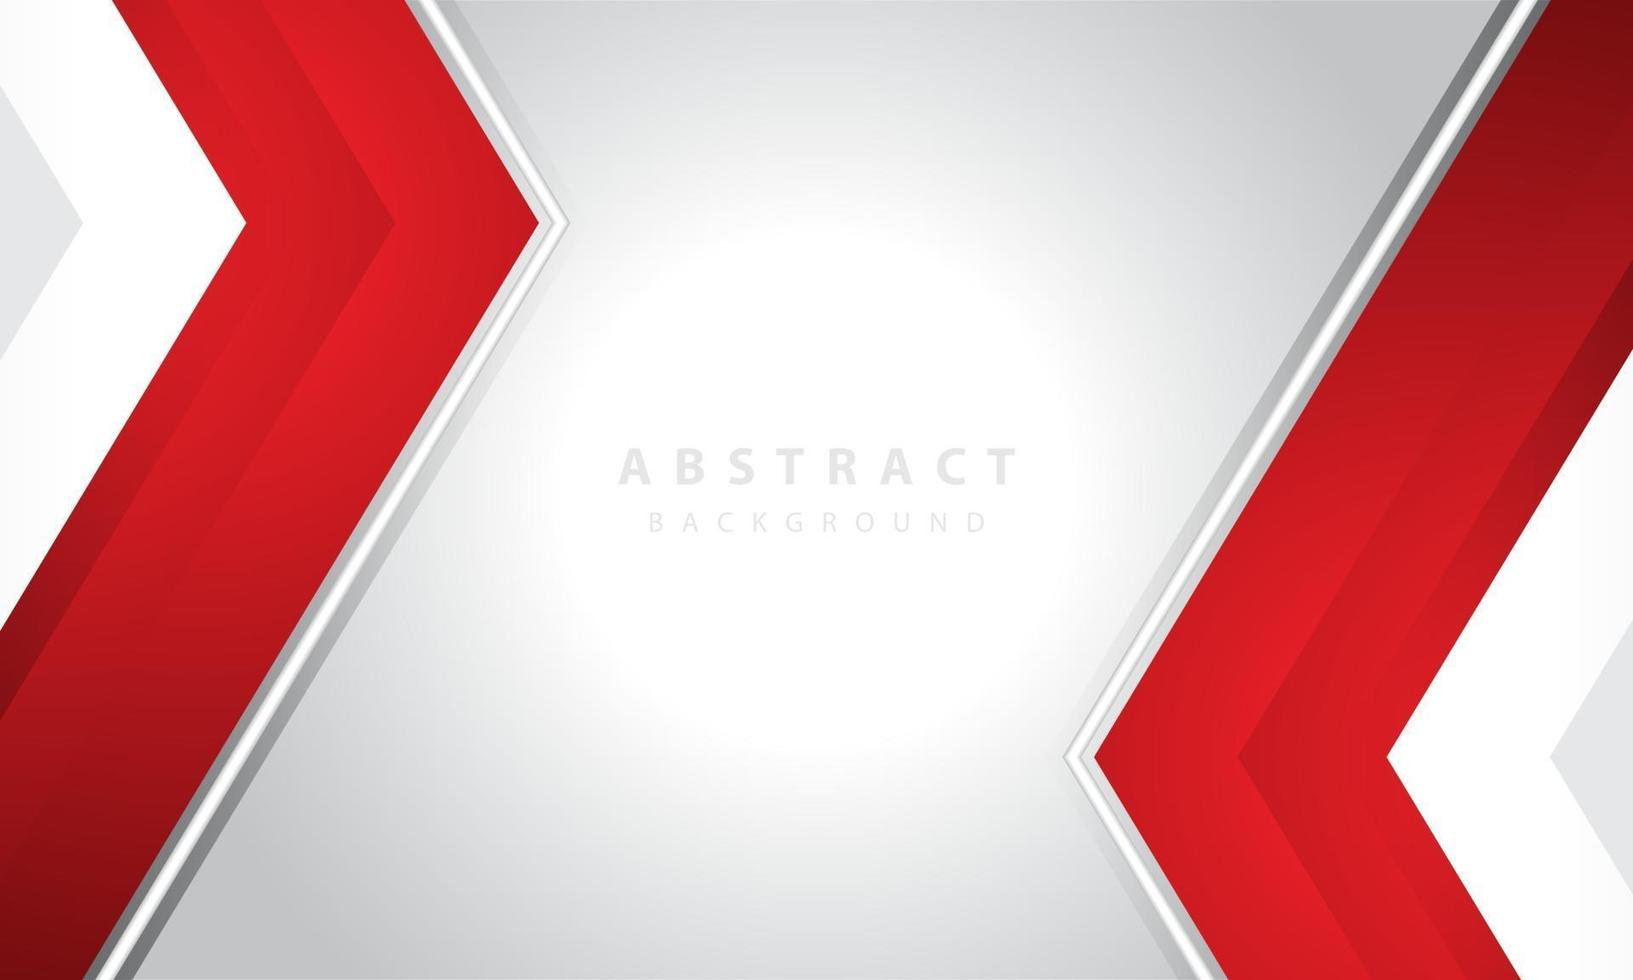 Hexagonal abstract white background with red frame shape. eps 10 vector